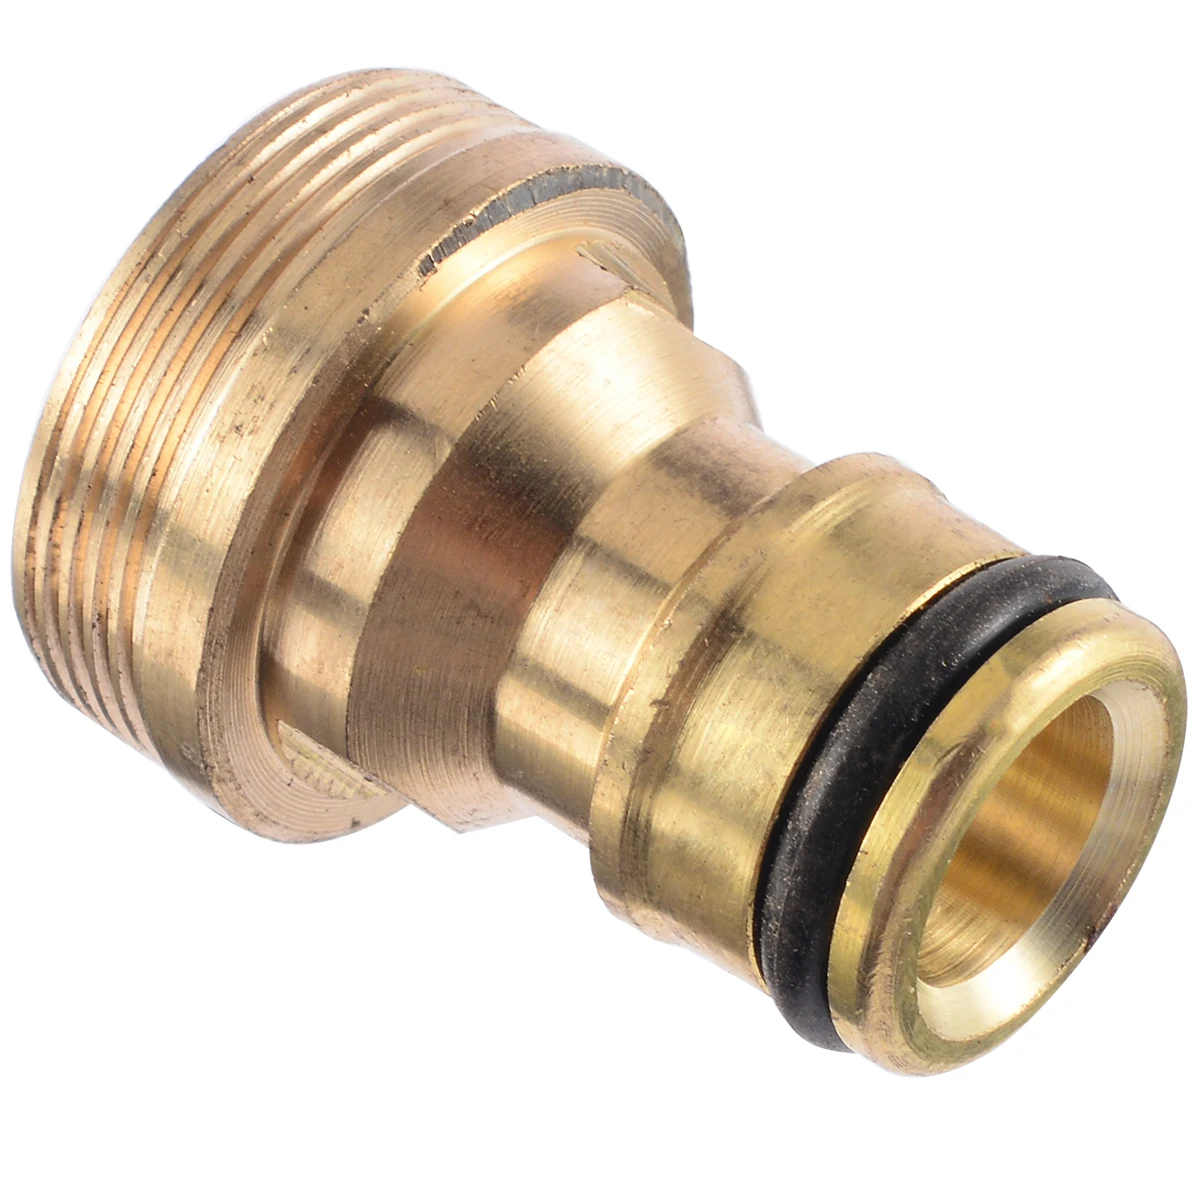 Brass Male Quick Connector Adaptor Garden Water Hose Pipe Tap Connector 